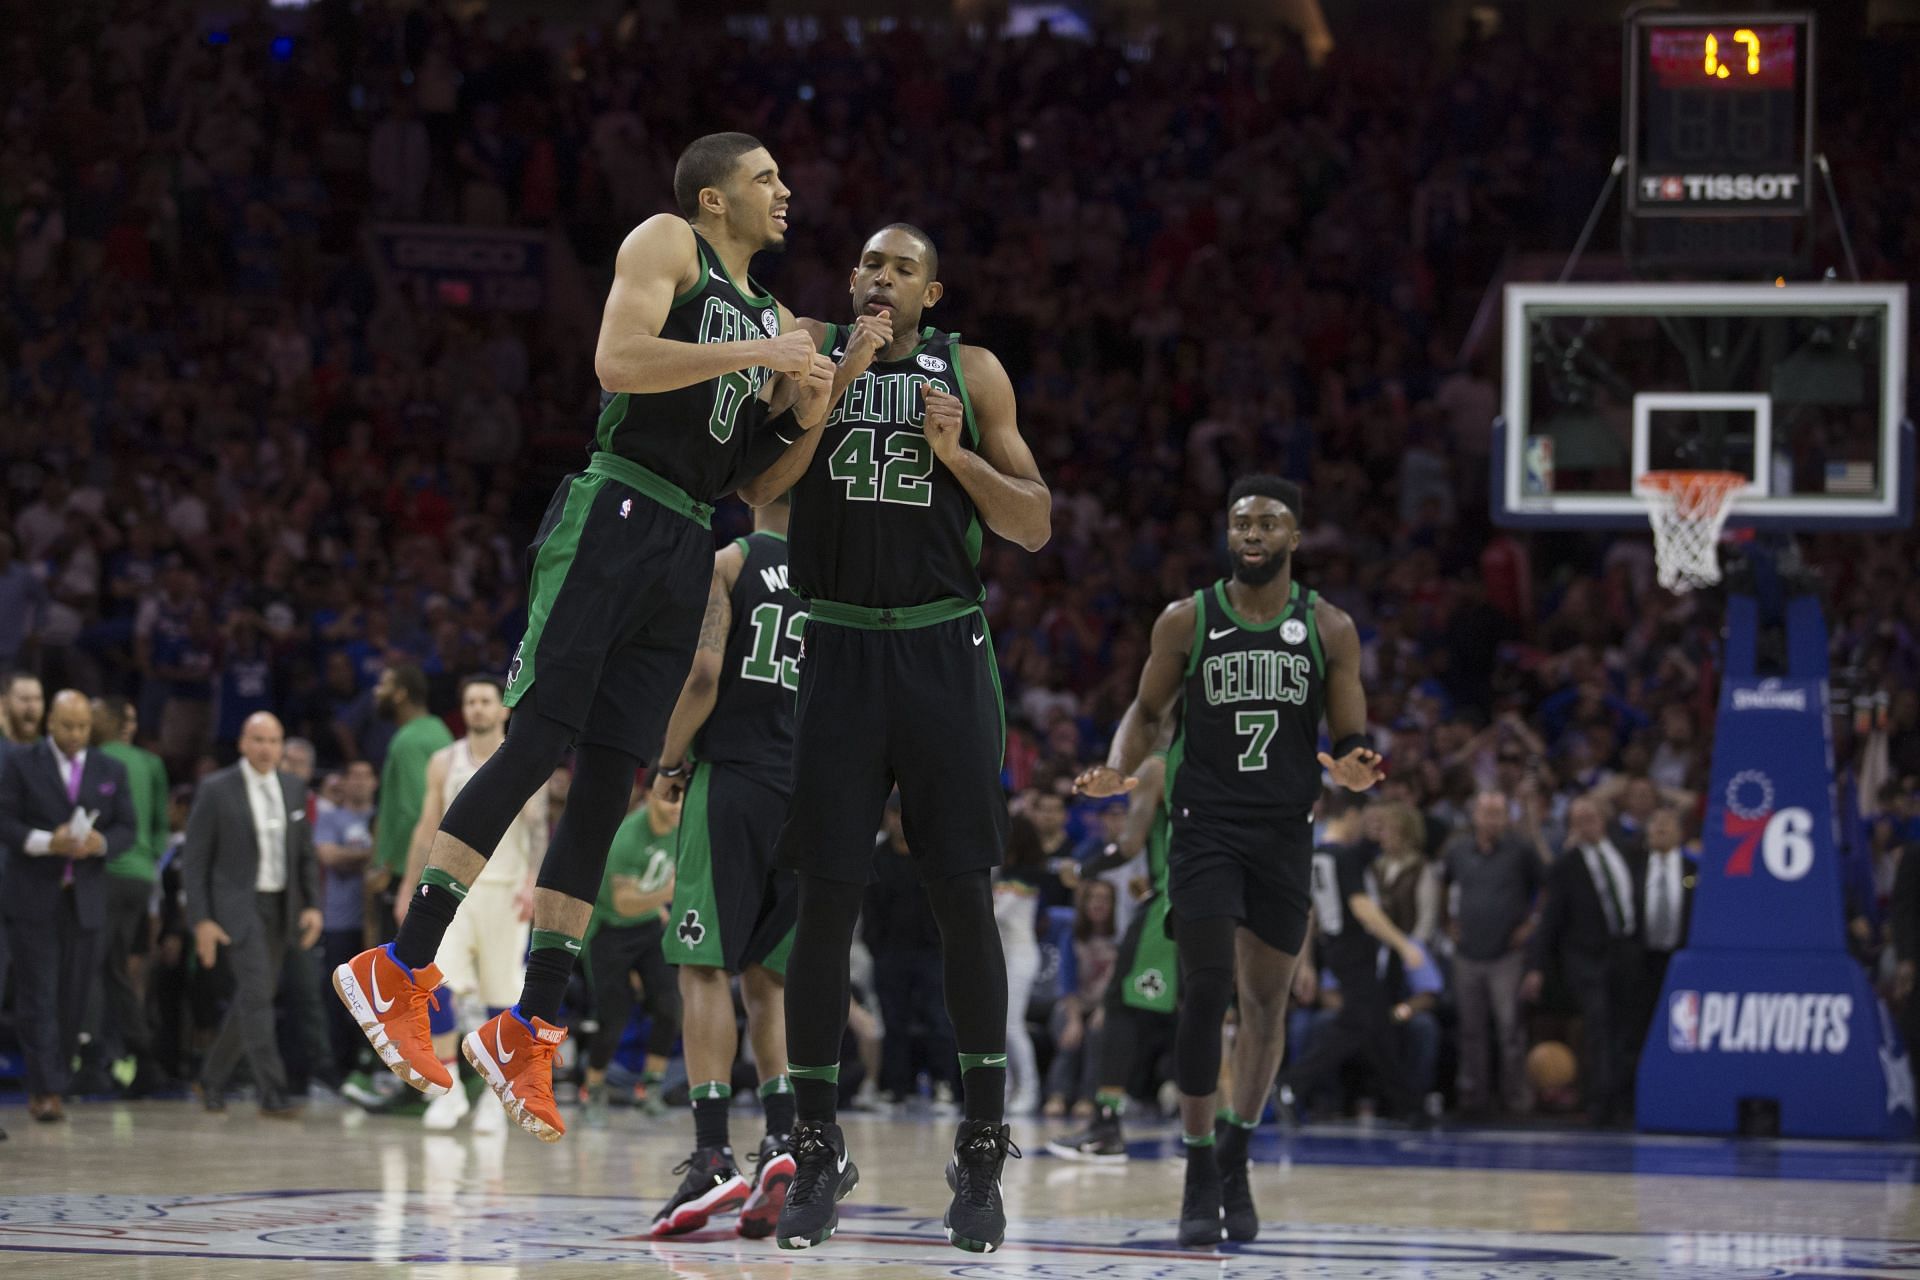 The revamped Boston Celtics are expecting a deep run in the playoffs this season.